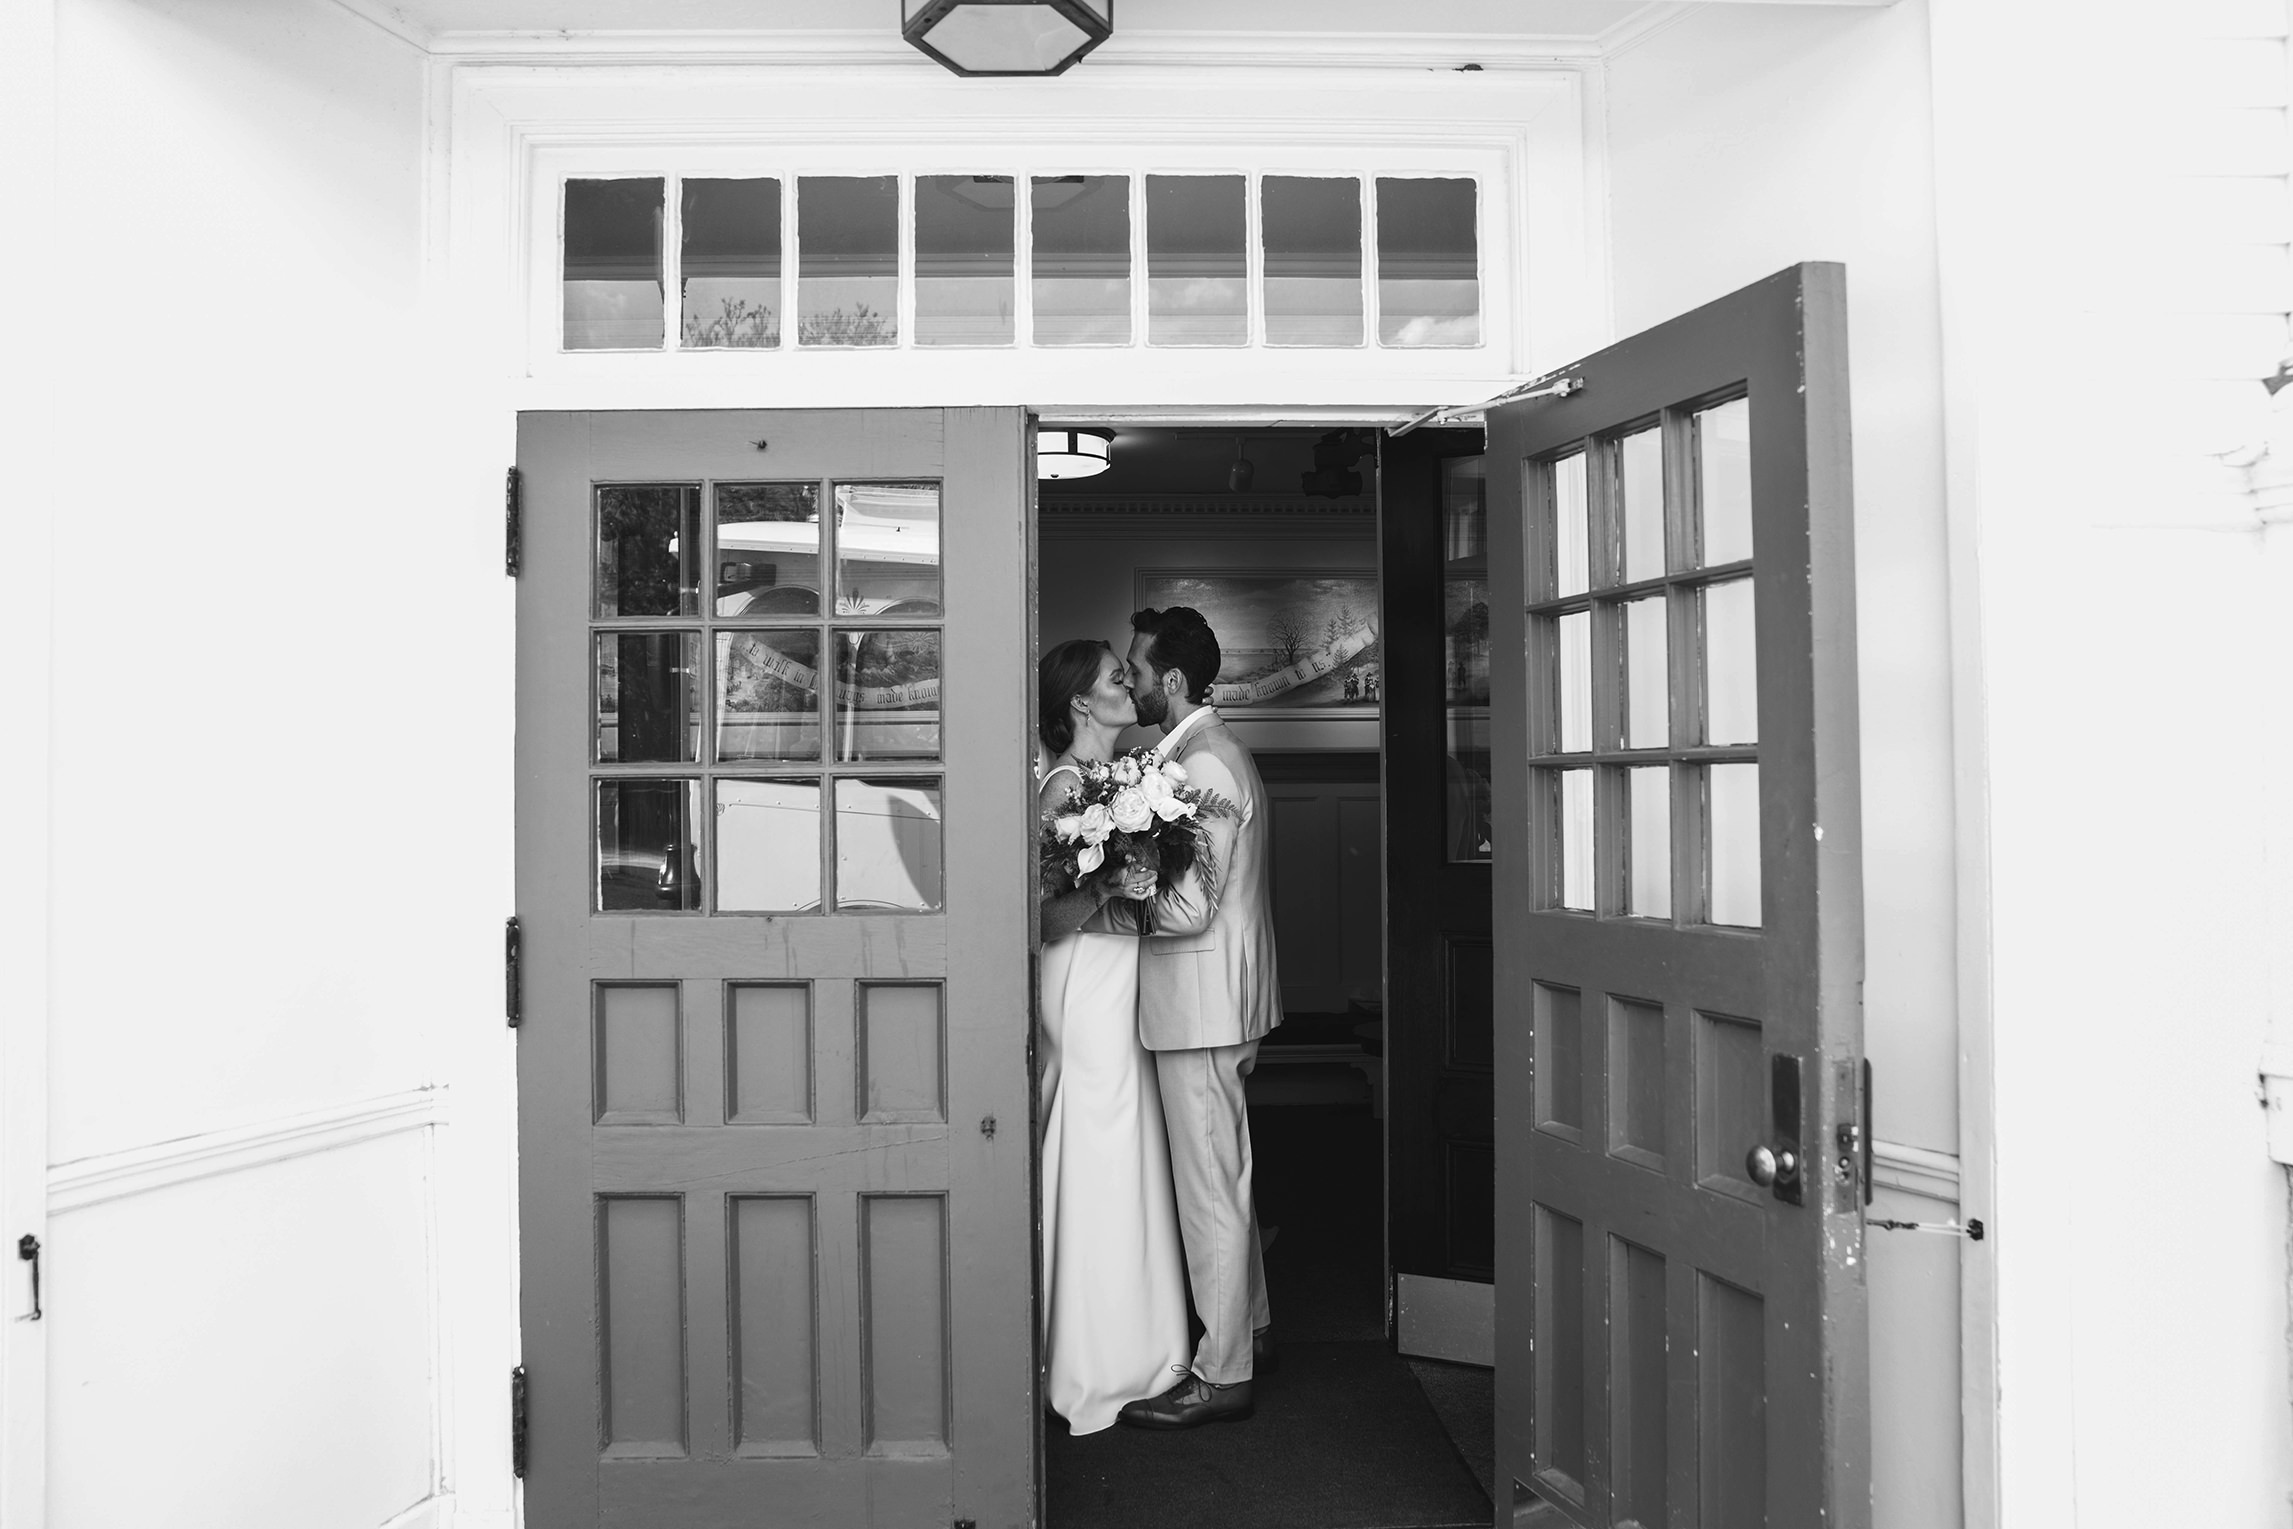 A documentary photograph featured in the best of wedding photography of 2019 showing a couple kissing as they leave the church as newly weds